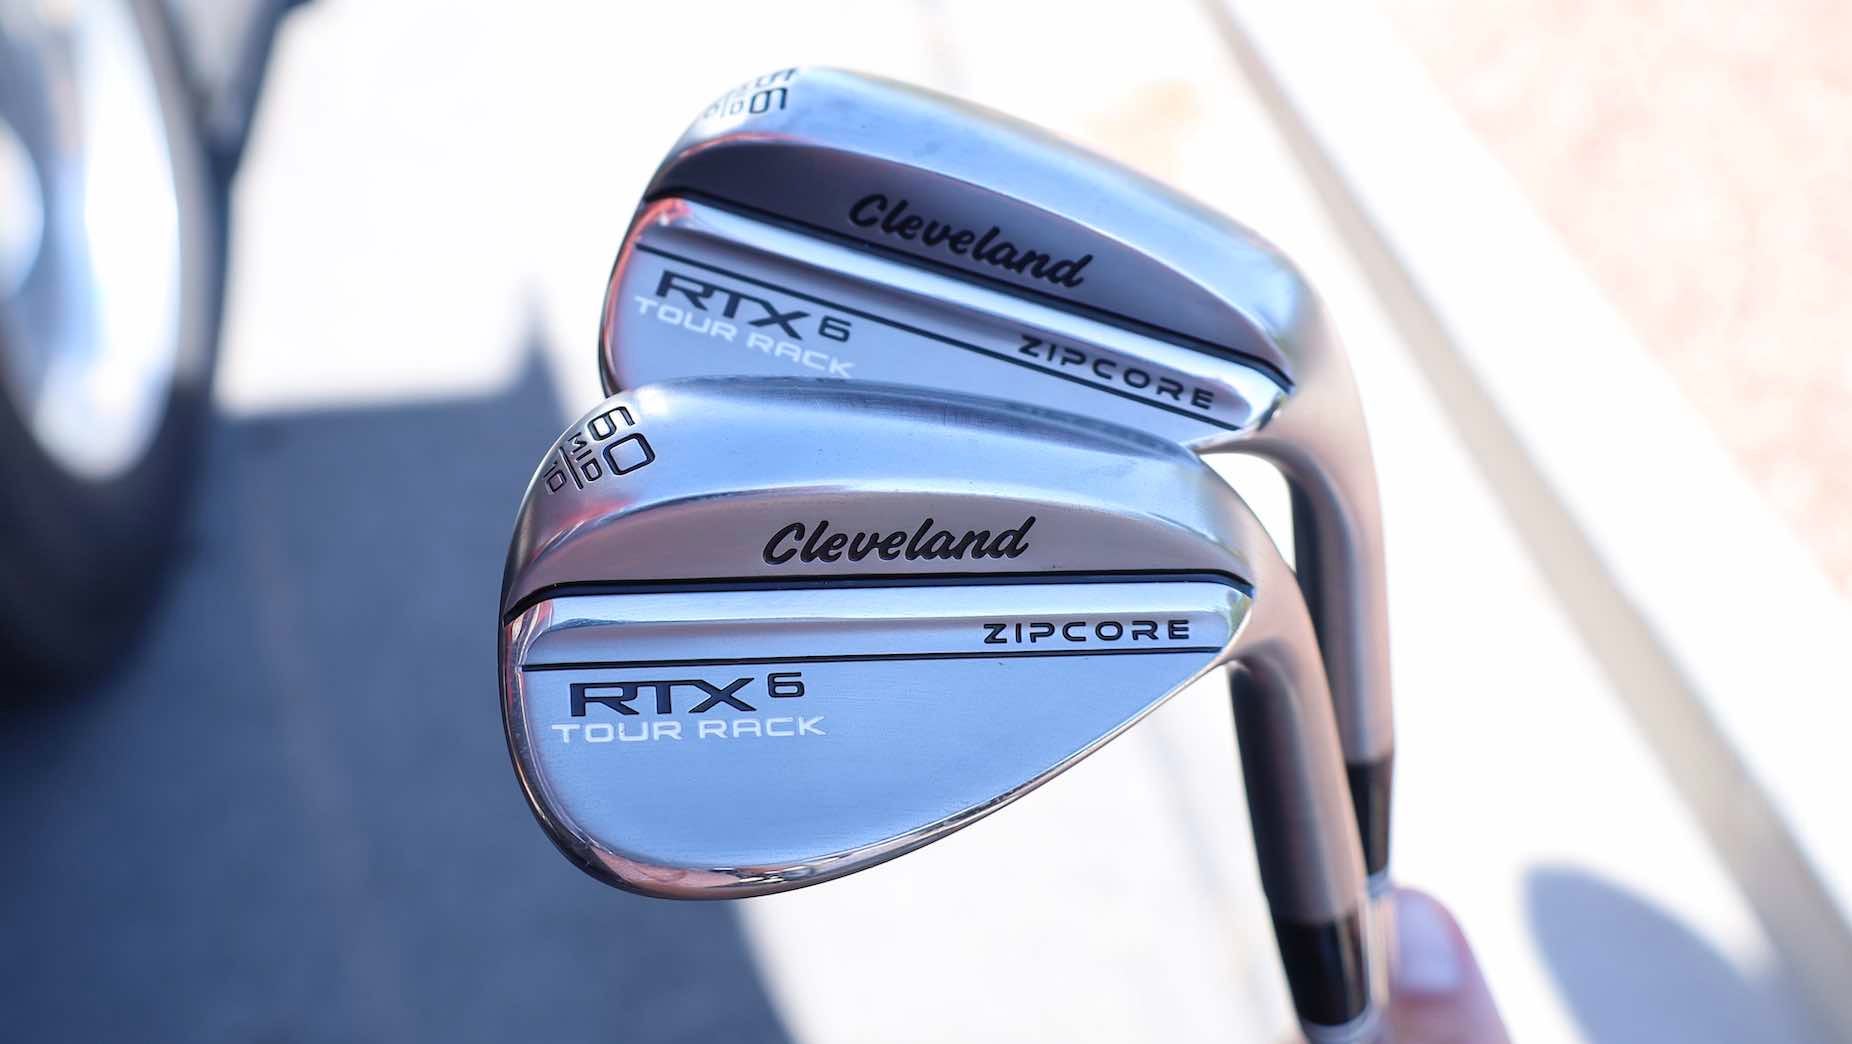 FIRST LOOK: Cleveland RTX 6 wedges debut in Las Vegas